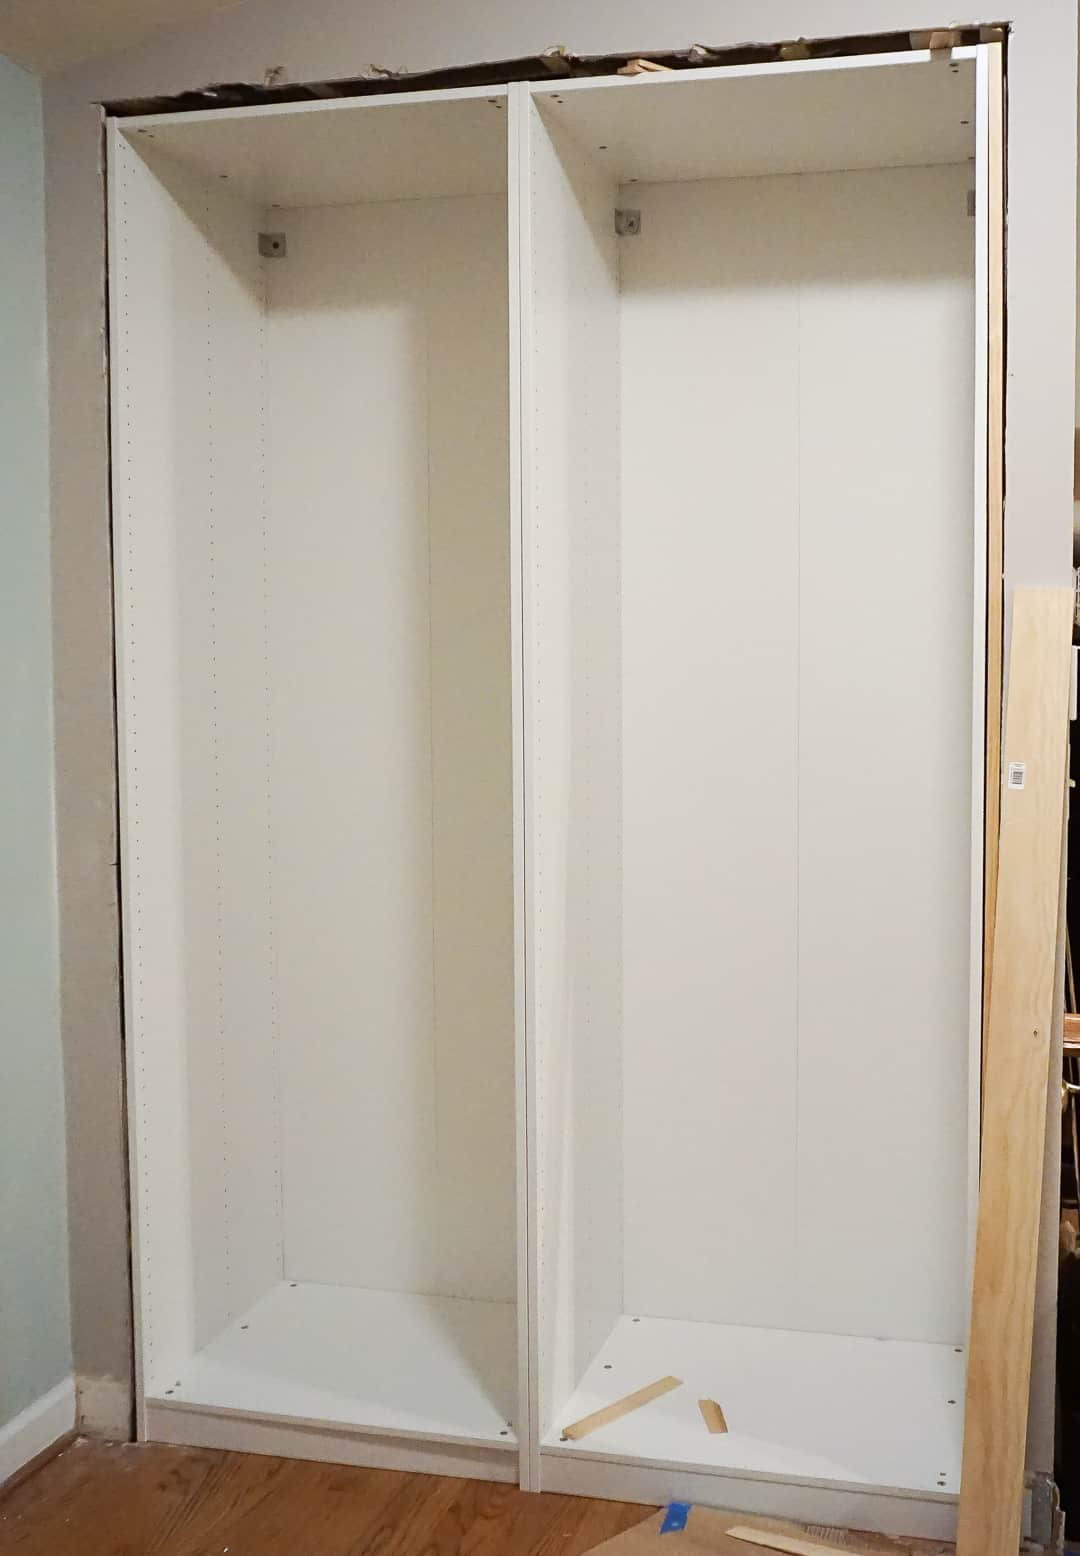 Updating a 1980’s Reach-In hall closet Part 2 - Installing A Pax System ...